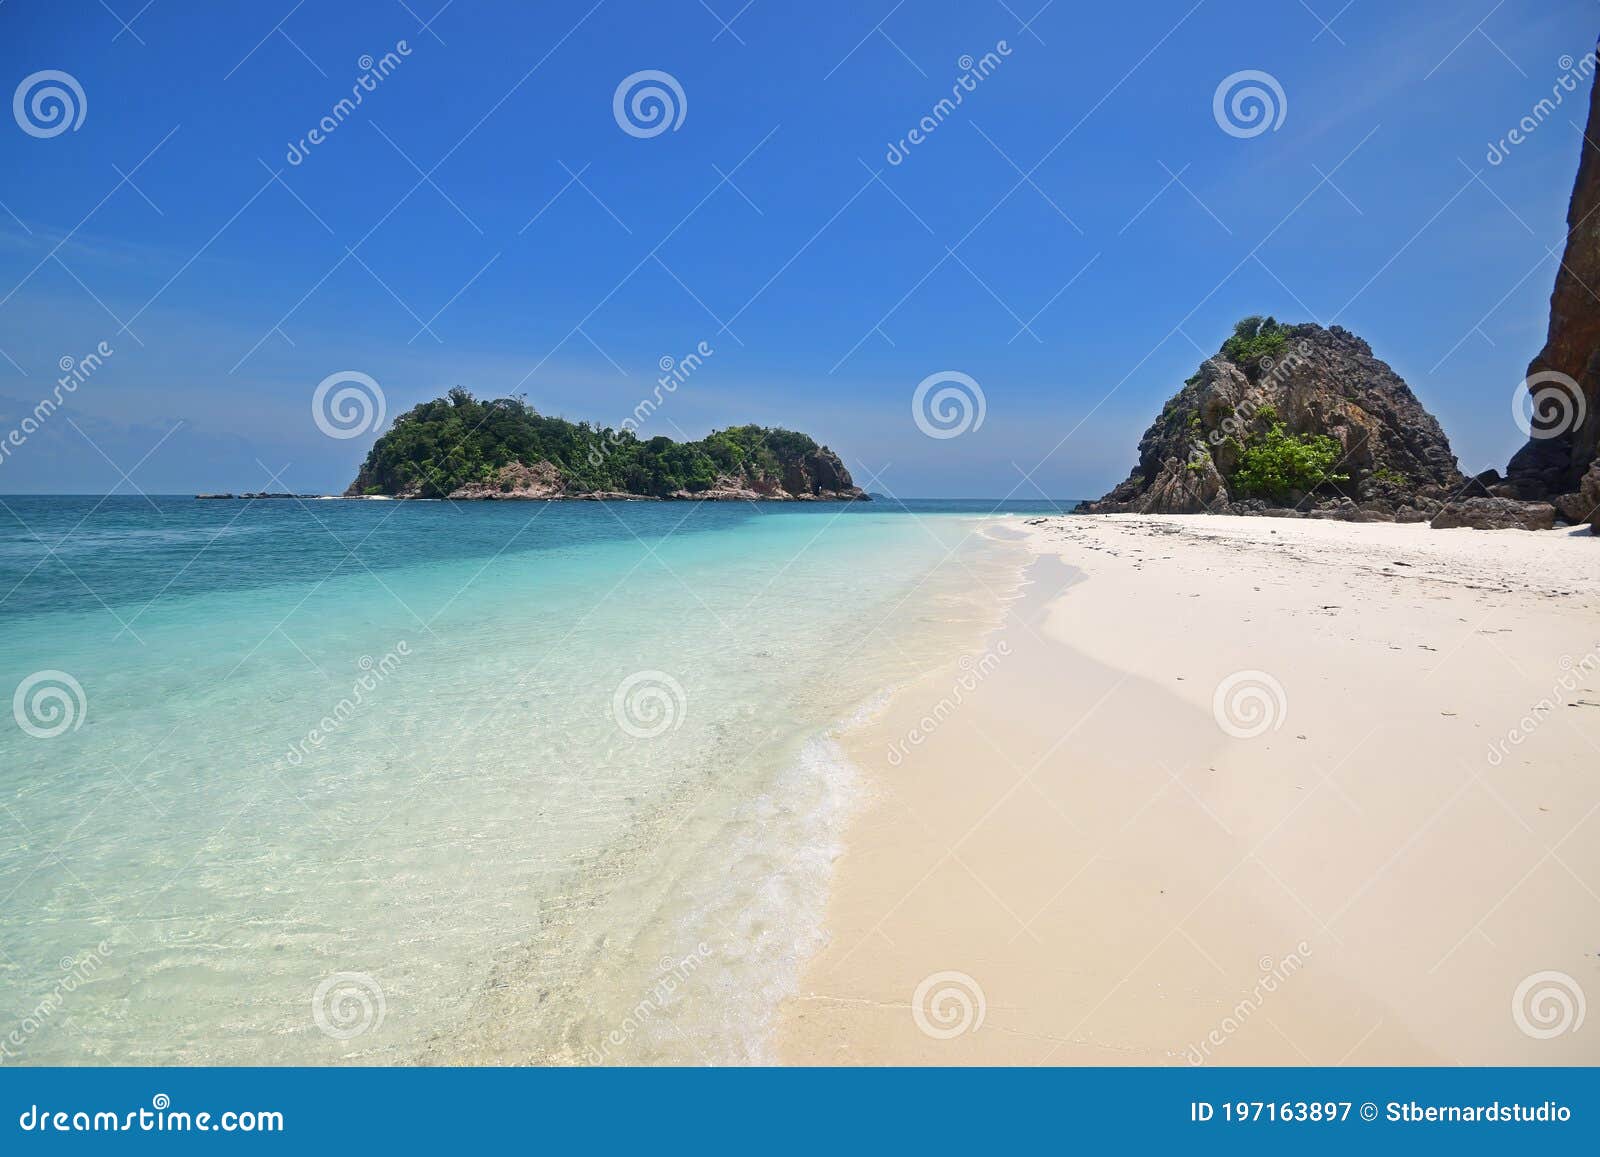 wave on white fine sandy sand & shallow blue water with speed boat & cloudless sky at pulau lima besar island, johor, malaysia